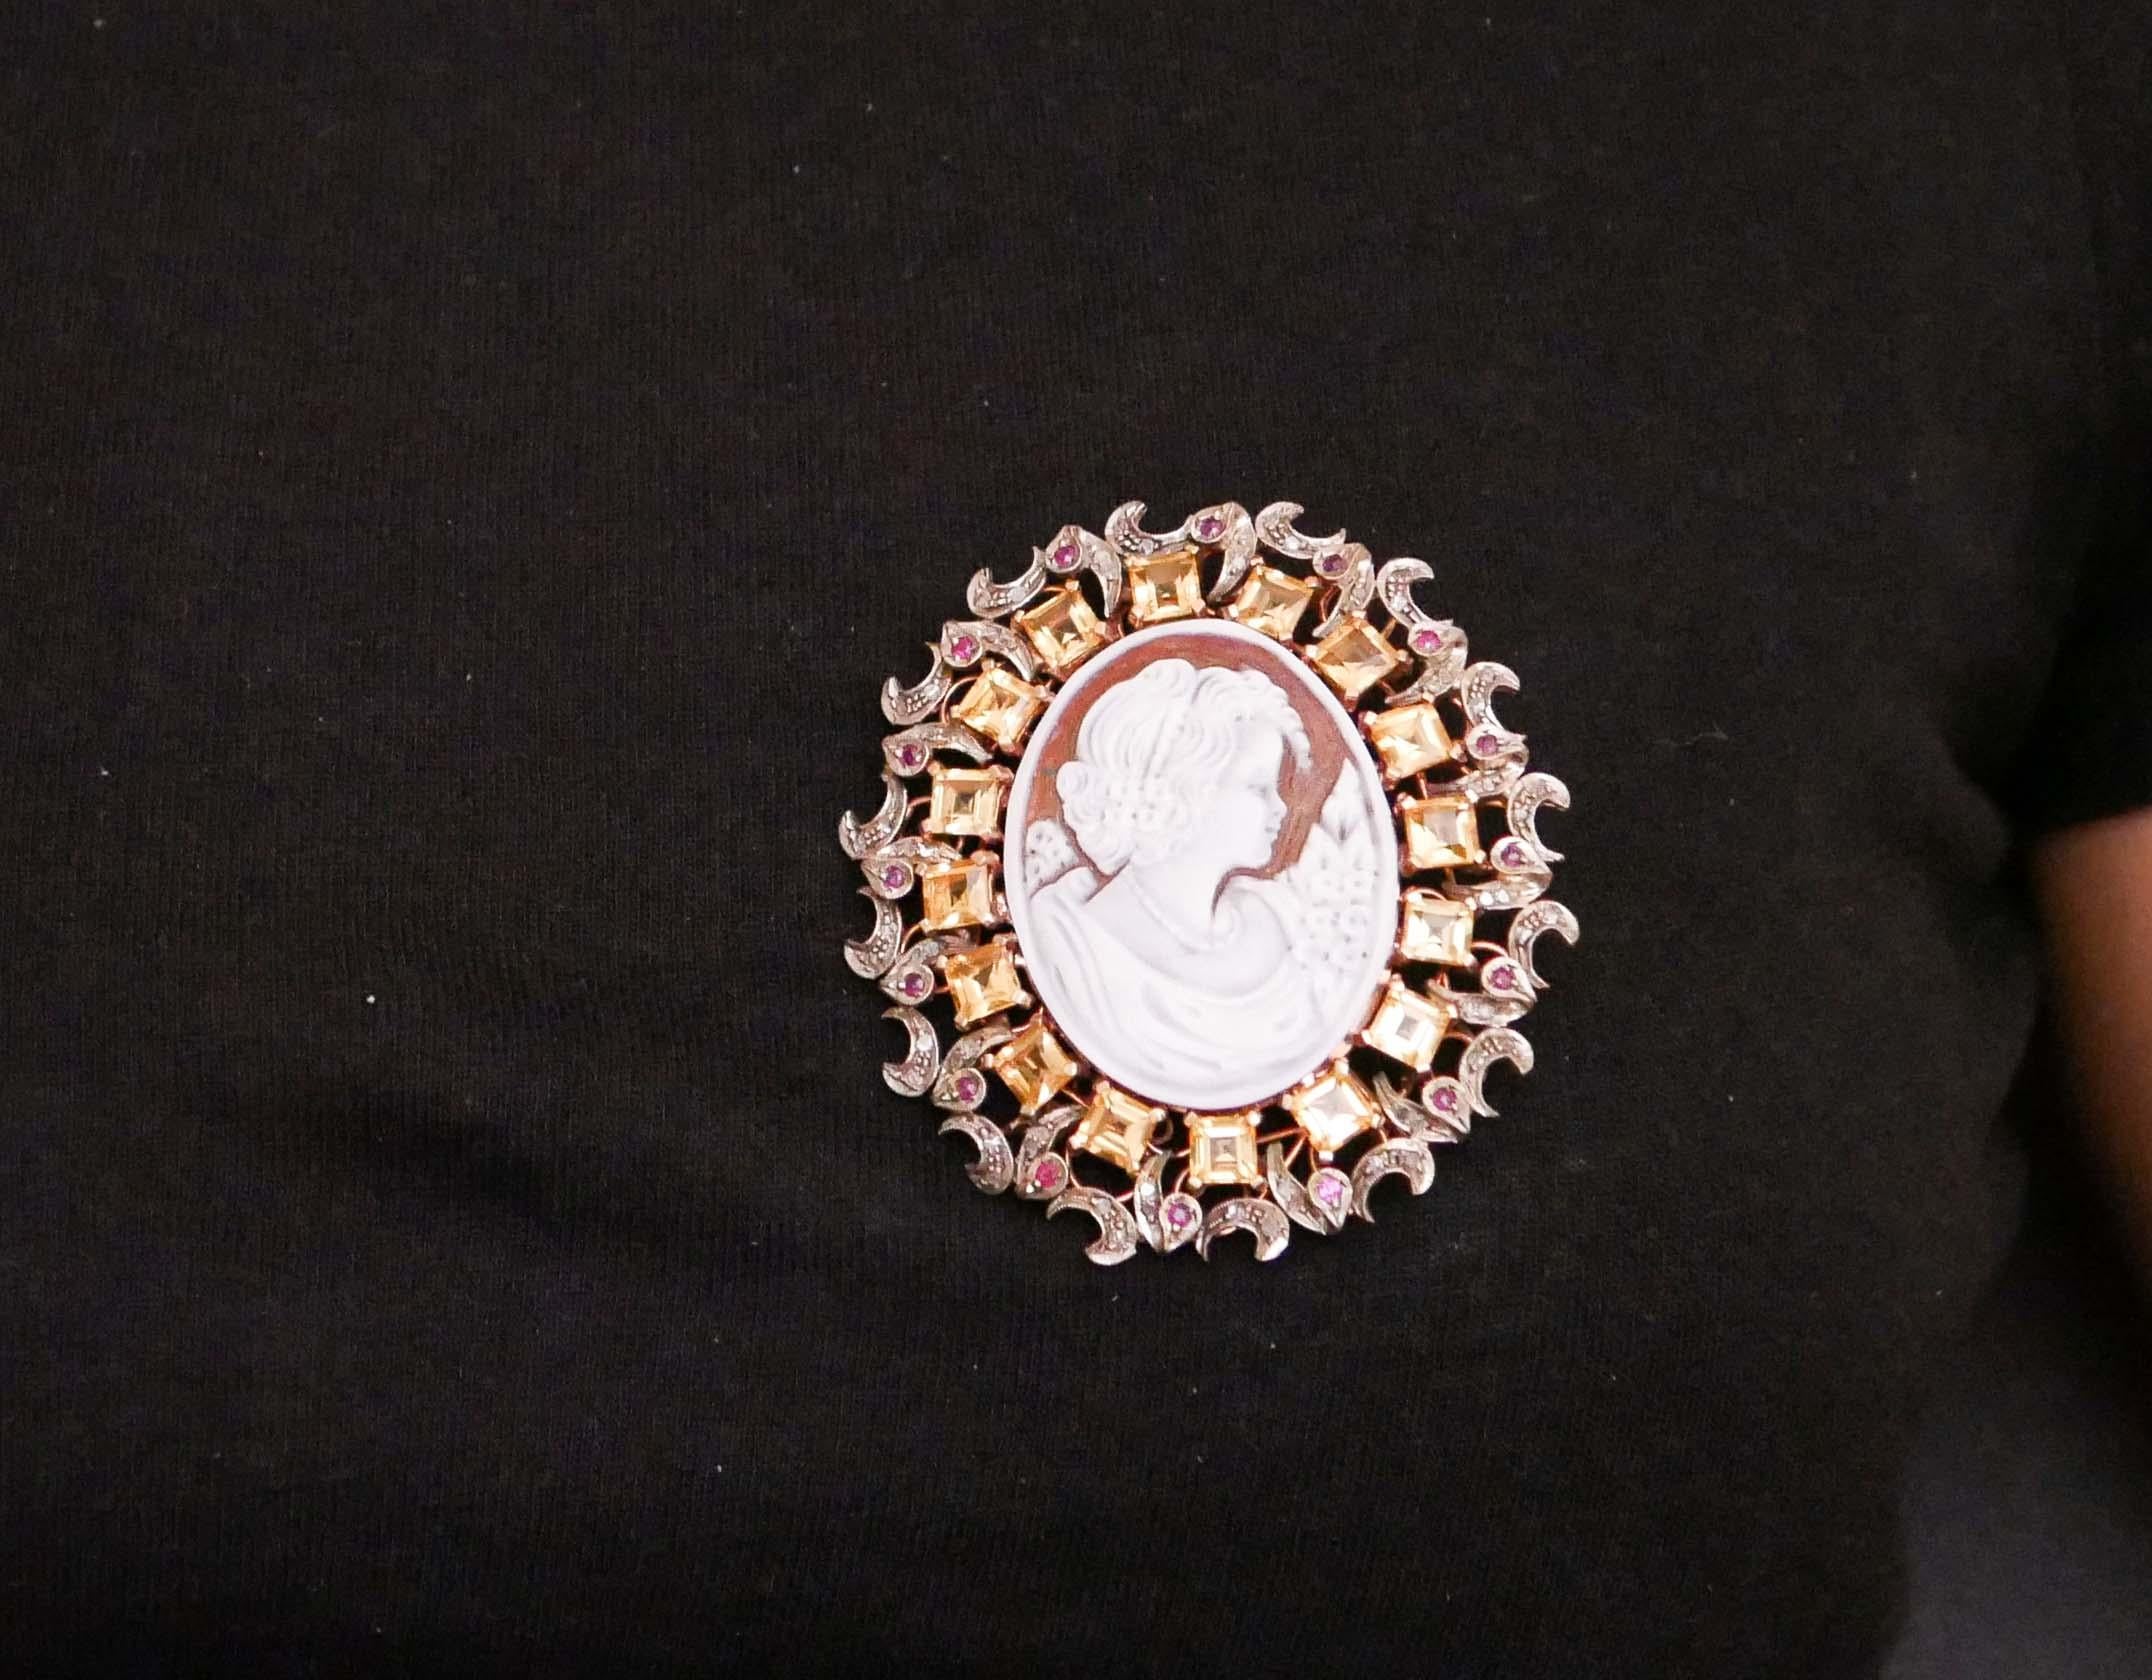 Cameo, Topazs, Rubies, Diamonds, Rose Gold and Silver Brooch/Pendant. For Sale 1